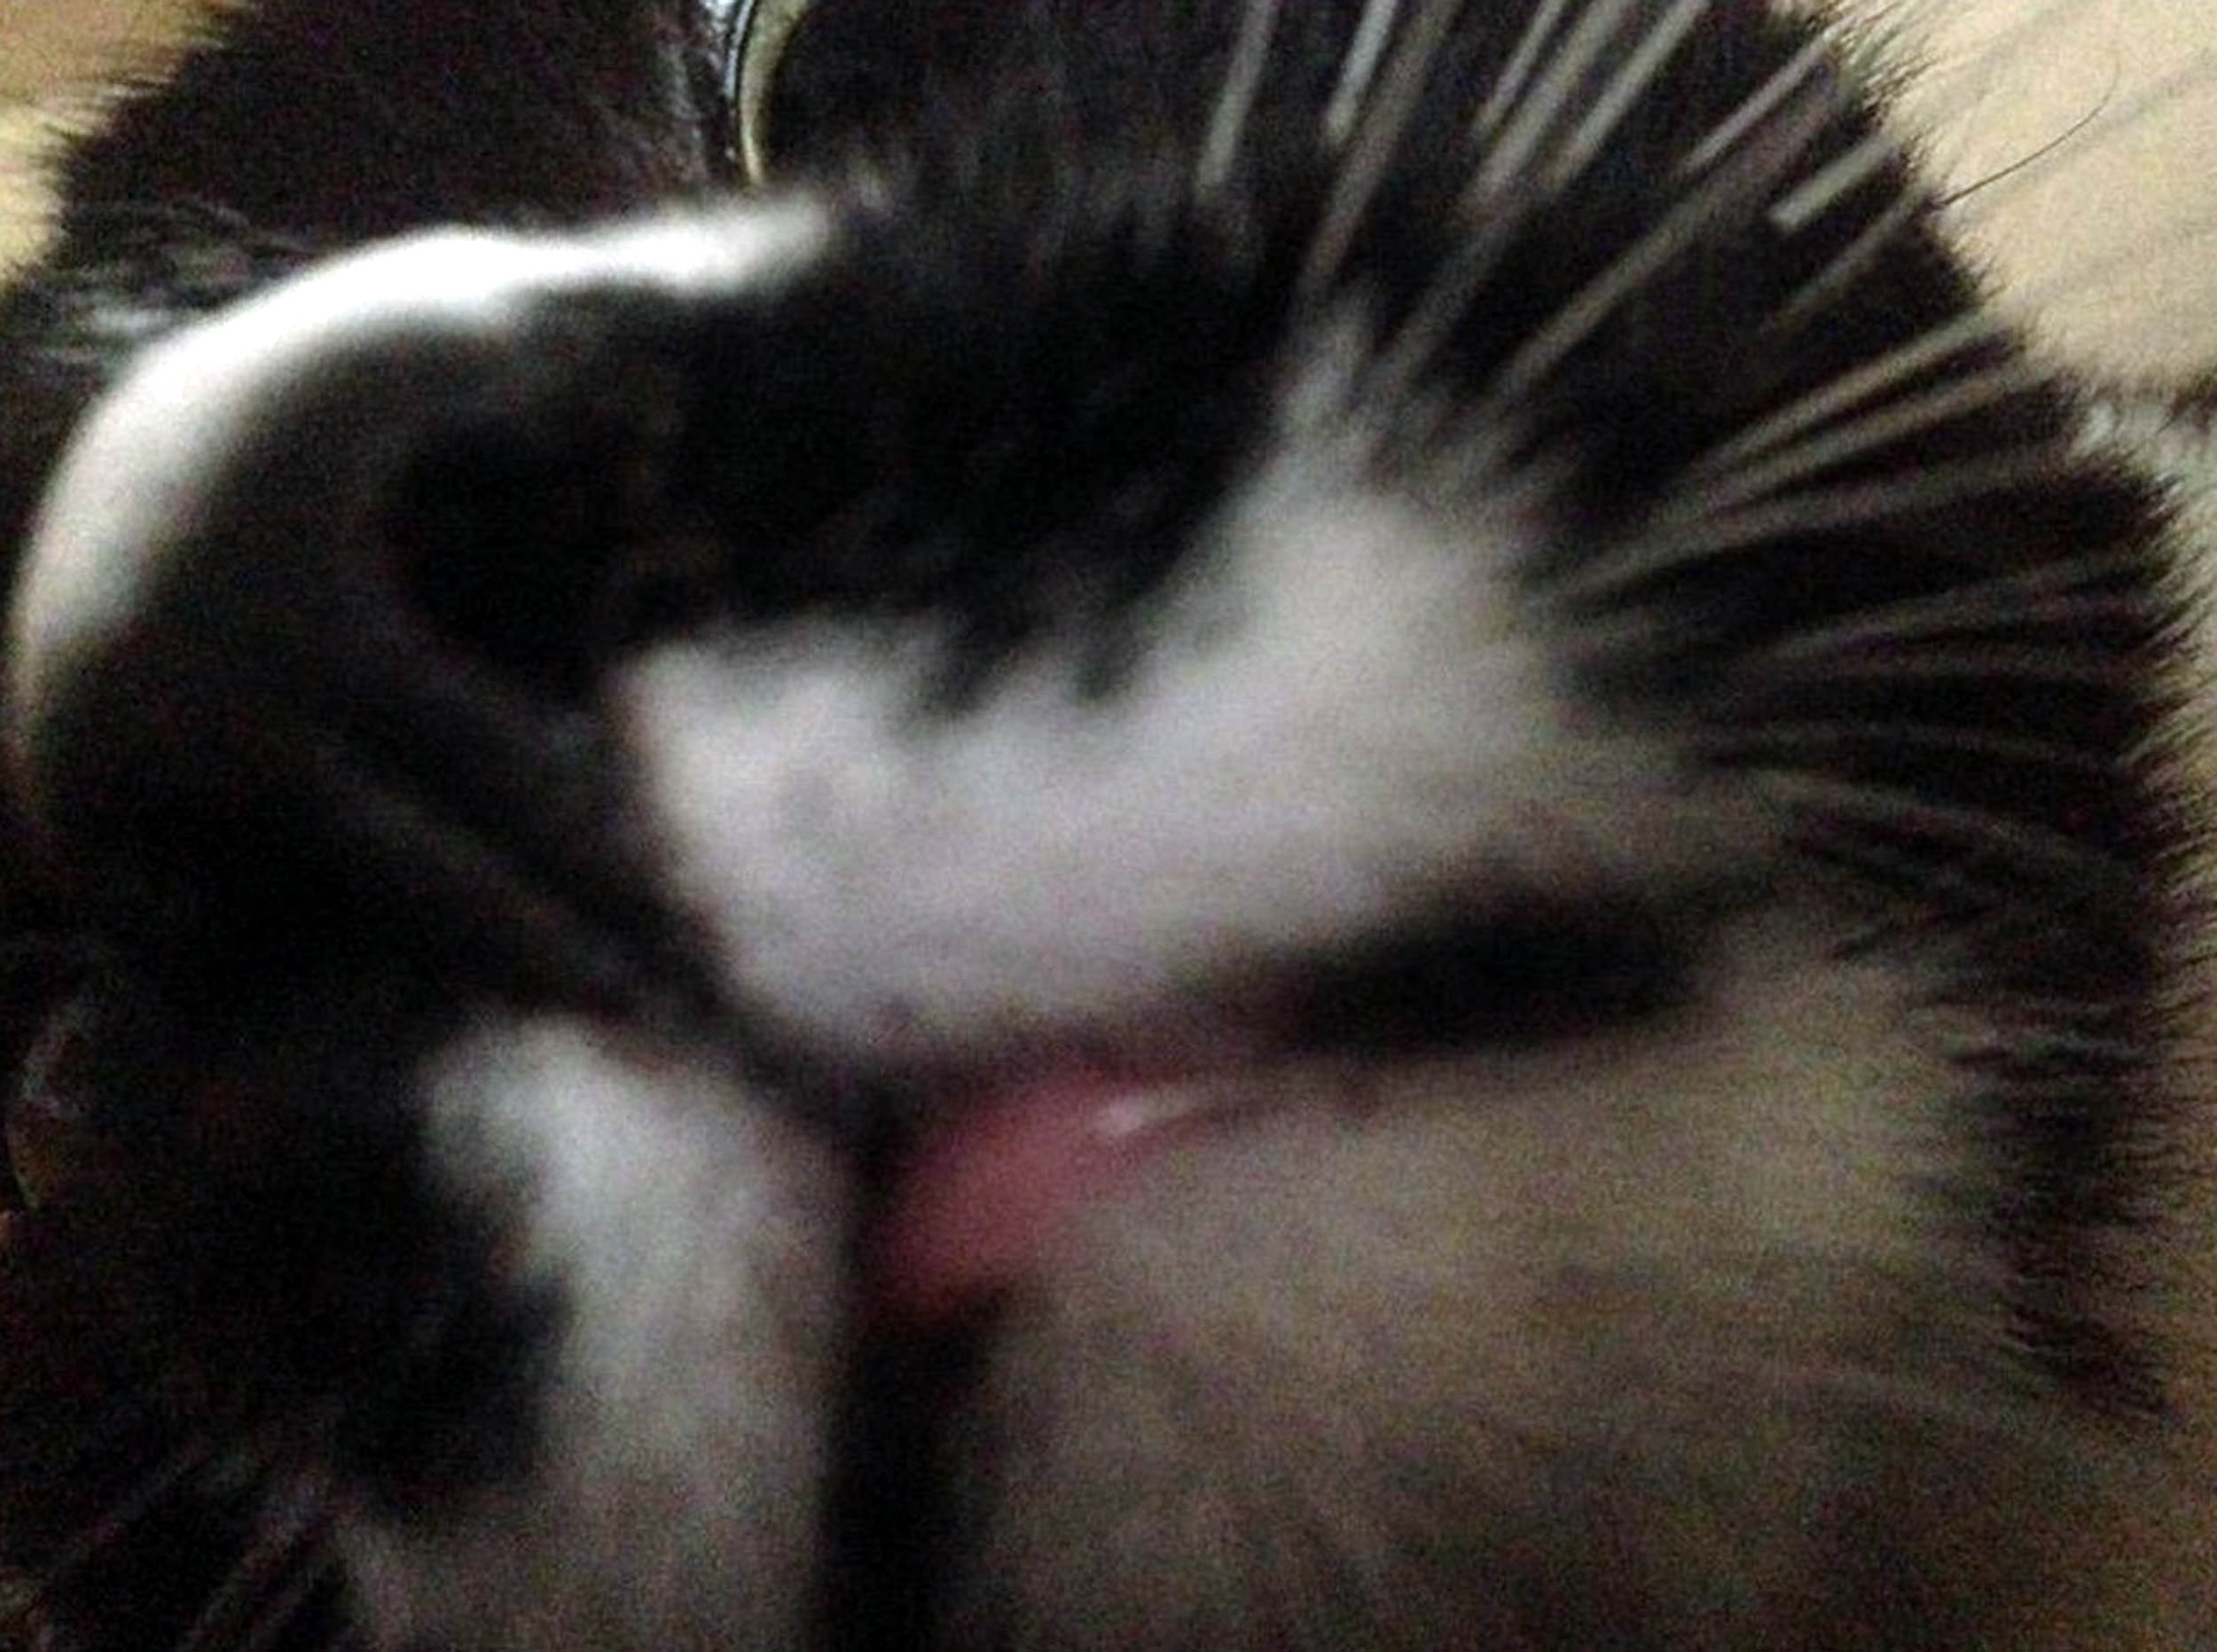 "My cat snatched my phone and accidentally took selfies" PETS across the globe are getting in on the selfie phenomenon. Curious cats, dopey dogs and even ham-fisted hamsters are snapping themselves on their owners mobiles - with hilarious results. The pictures, which include a close-up of a one-eyed cat, all were produced when clumsy pets stood on their owners phones or iPads. The results are varied - some pictures show cats looking down into the camera with their chin appearing extremely enlarged, and in others a dogs nose takes up most of the photo.